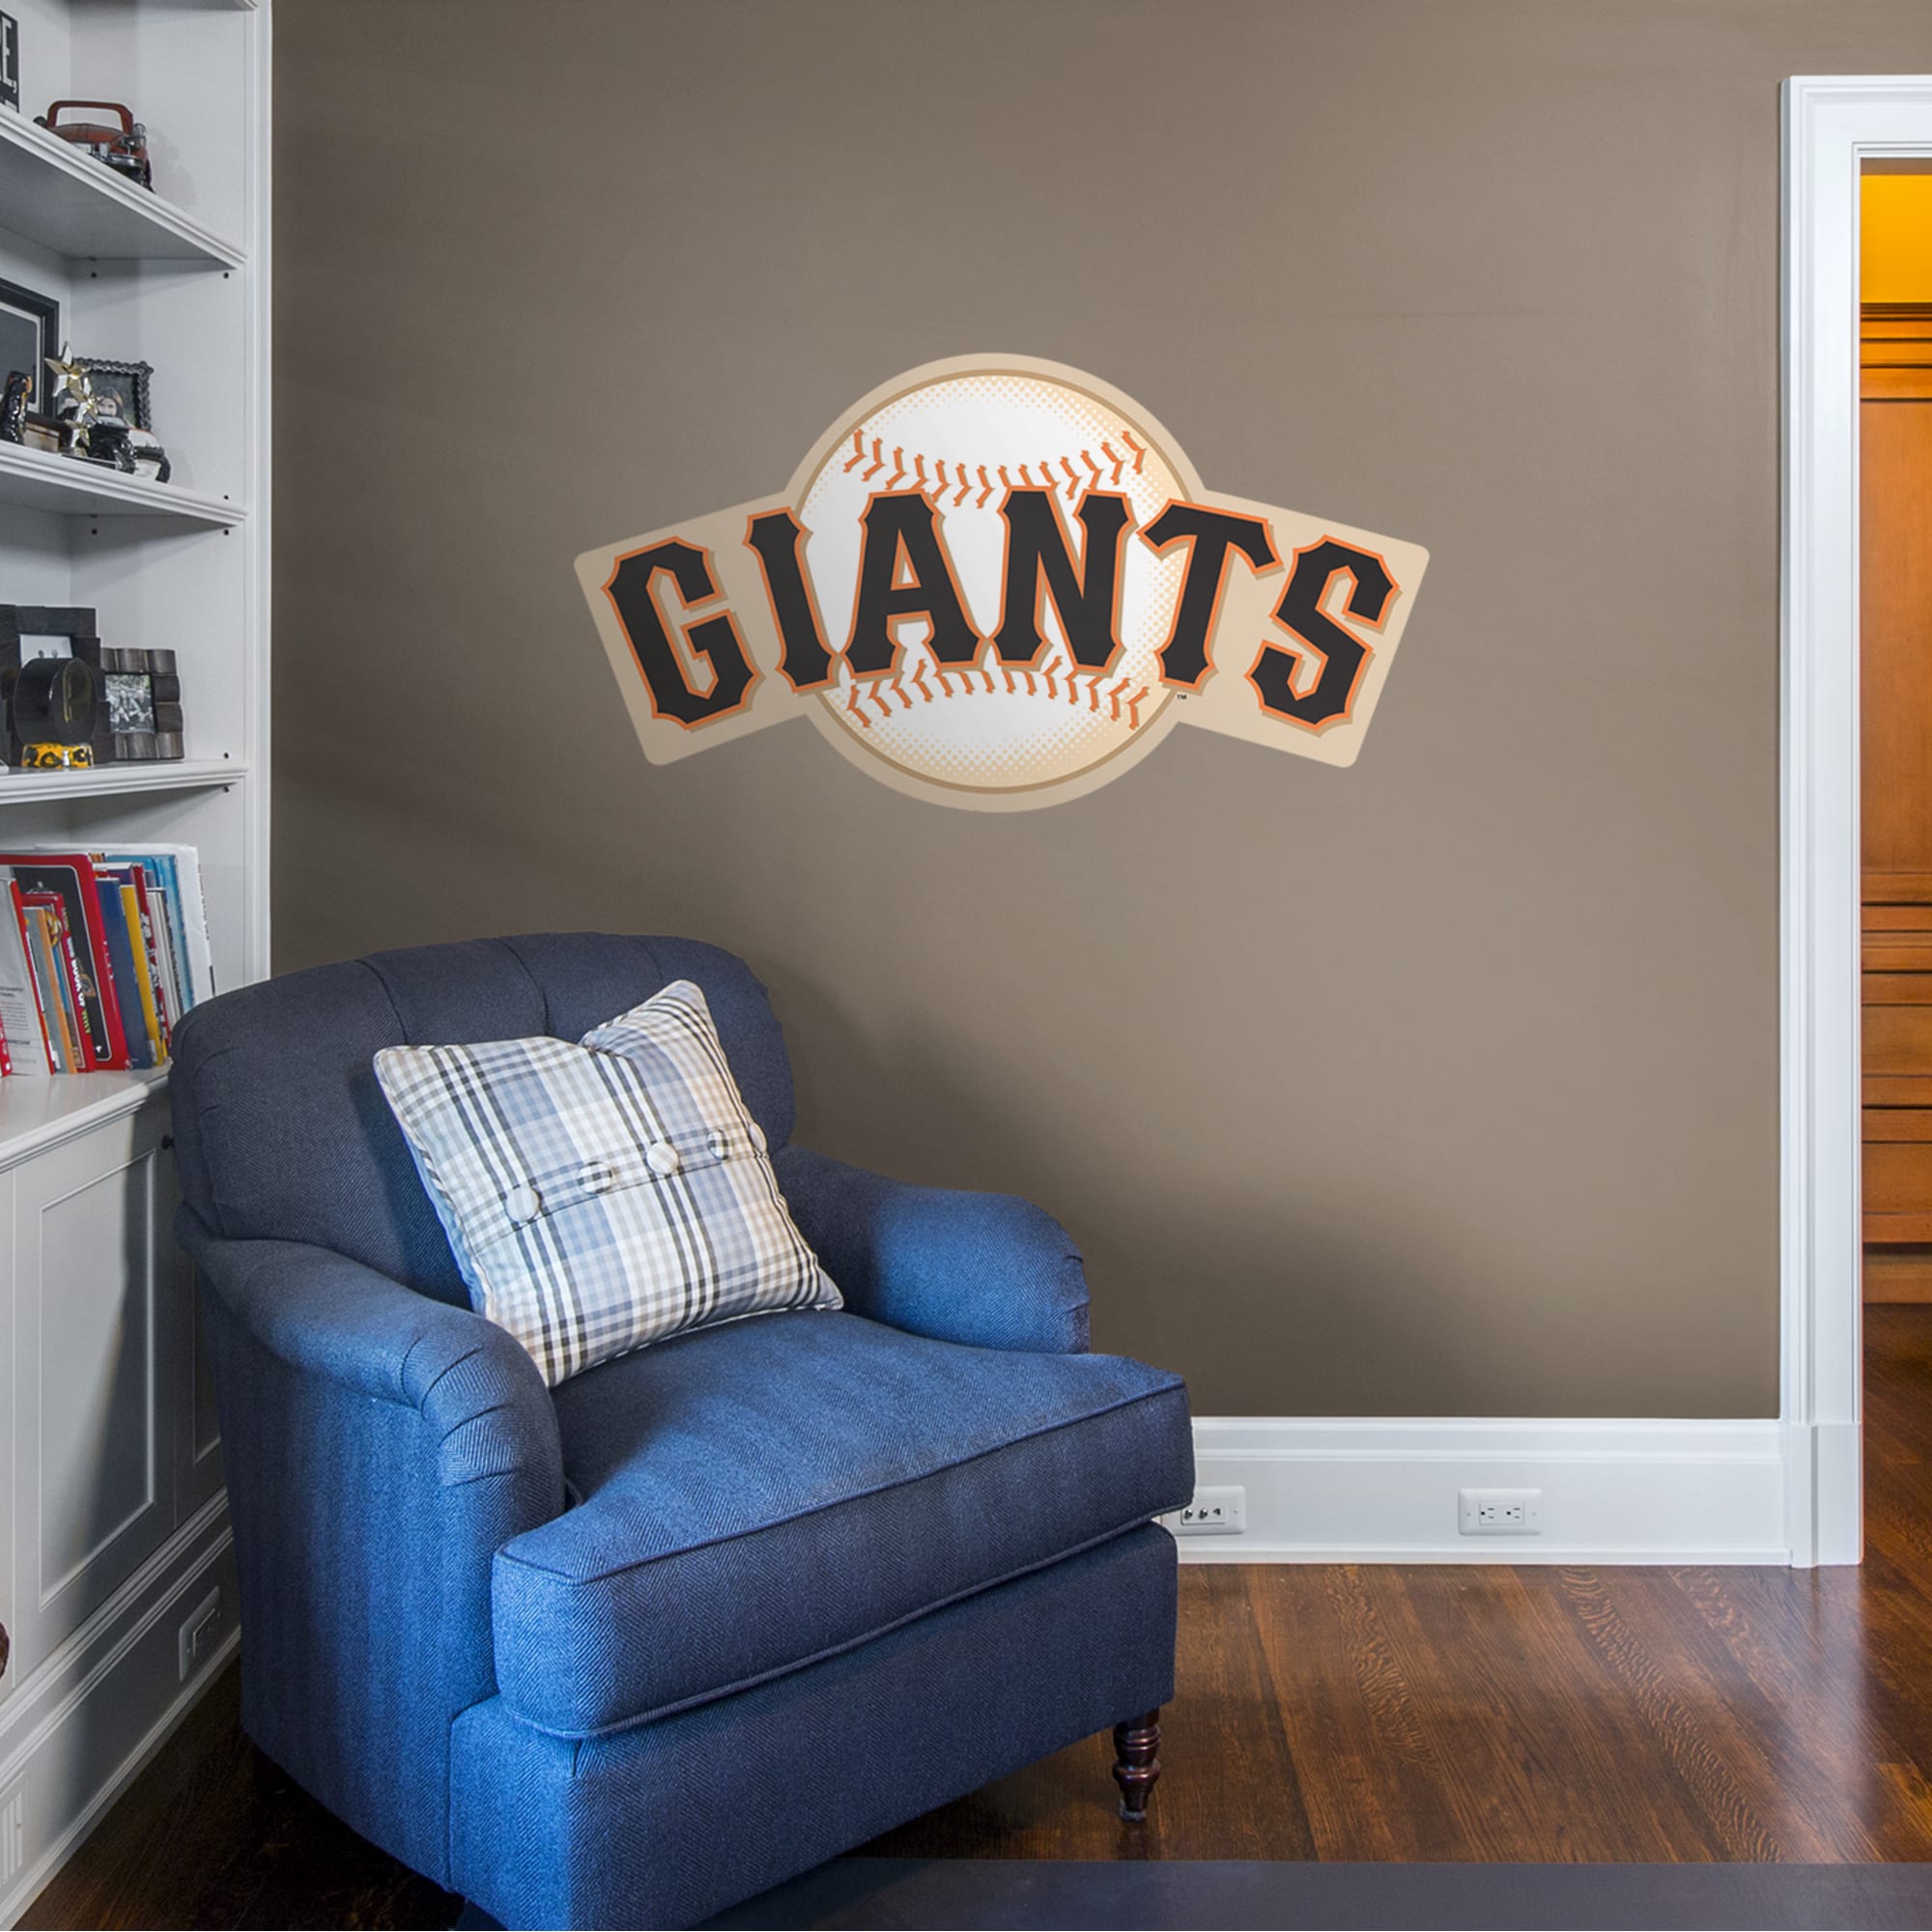 San Francisco Giants: Logo - Officially Licensed MLB Removable Wall Decal Giant Logo (50"W x 27"H) by Fathead | Vinyl